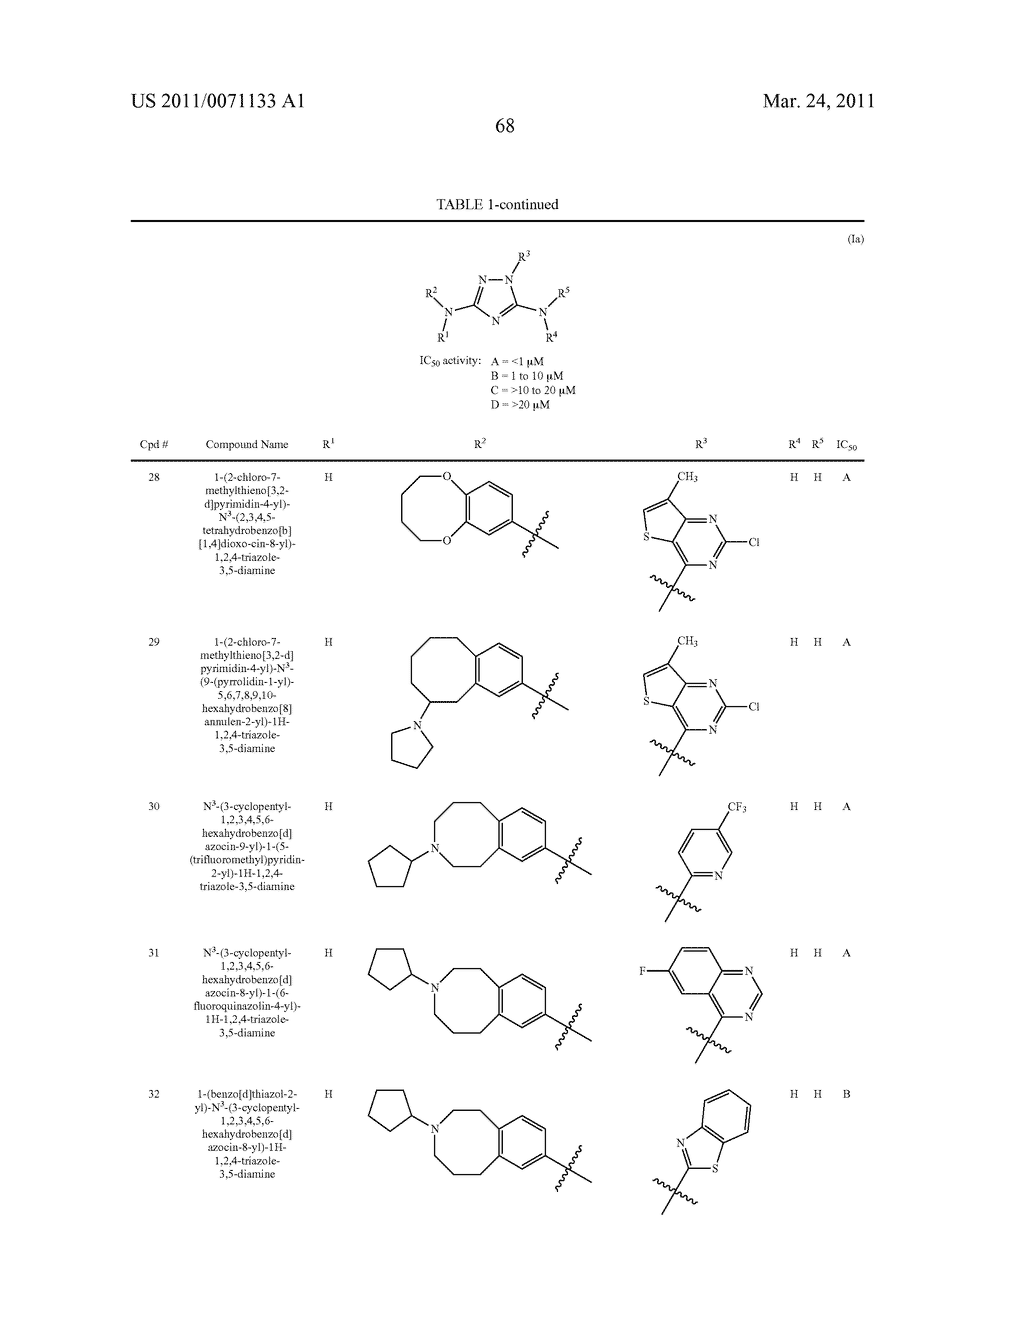 BICYCLIC ARYL AND BICYCLIC HETEROARYL SUBSTITUTED TRIAZOLES USEFUL AS AXL INHIBITORS - diagram, schematic, and image 69